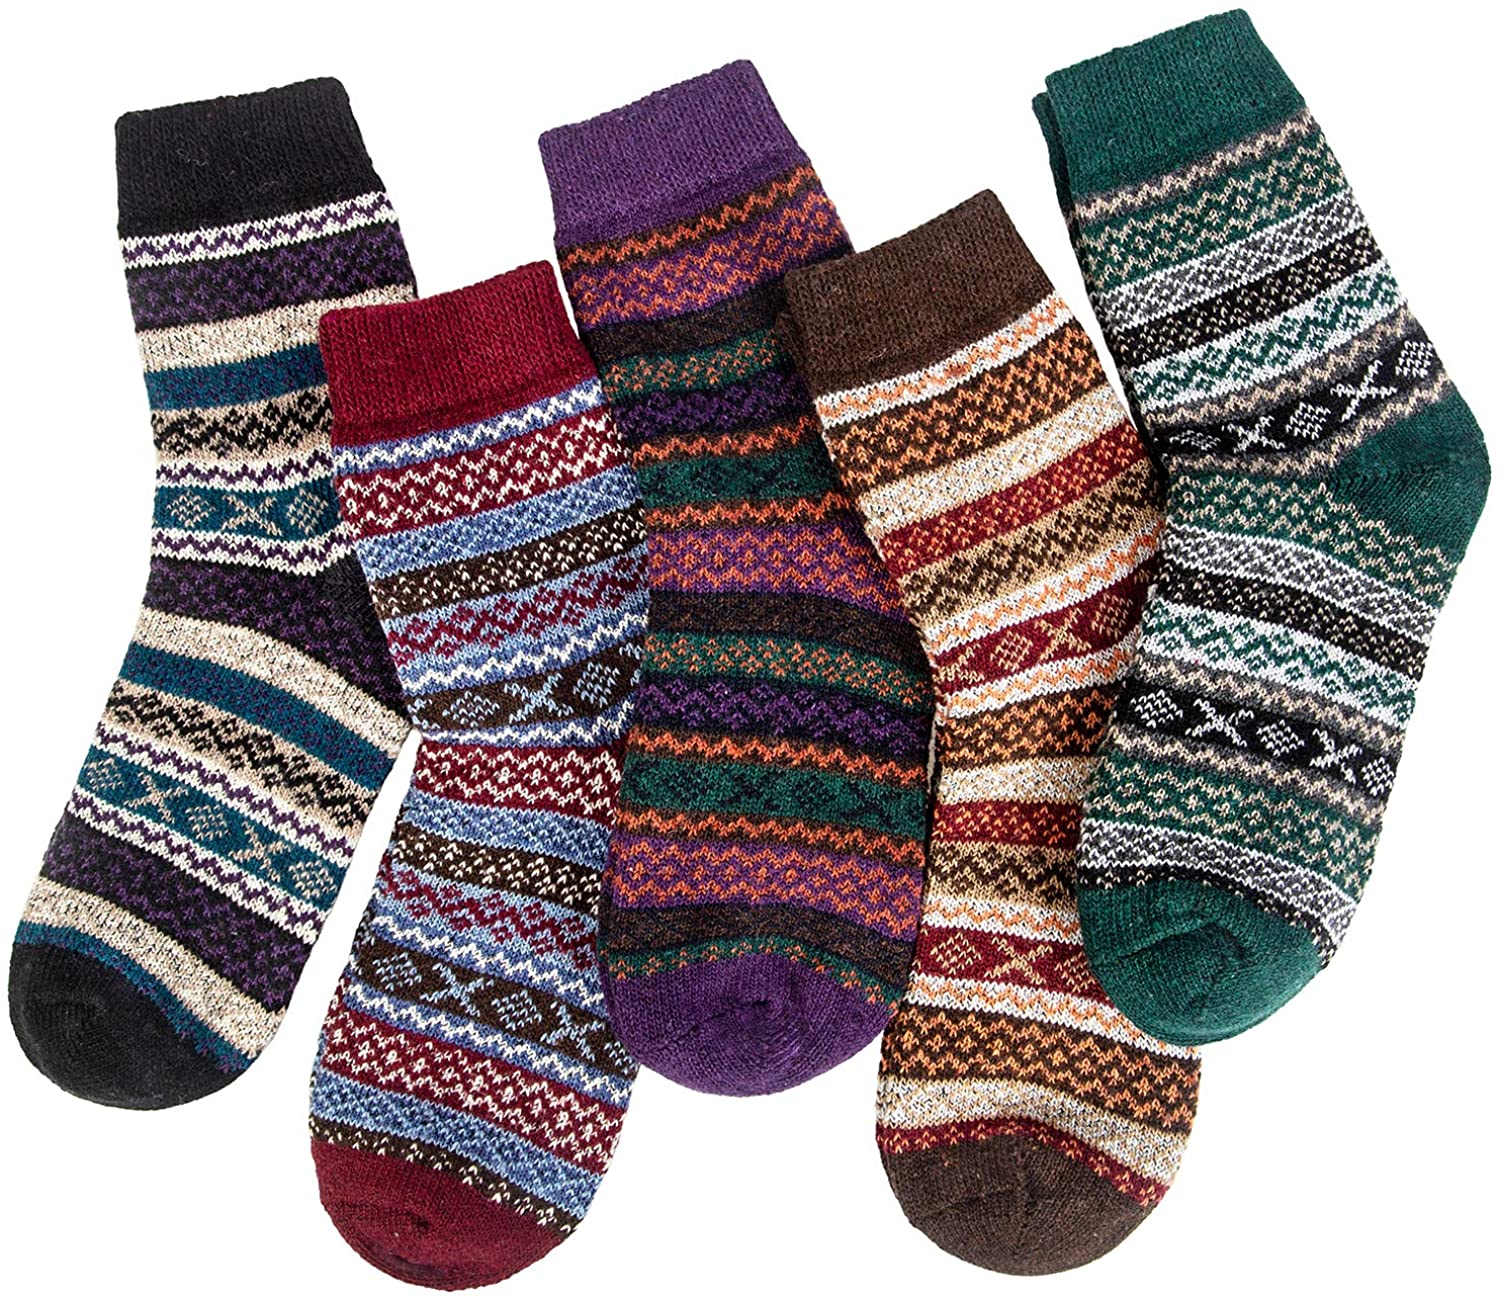 Pack of 5 Womens Winter Socks Warm Thick Knit Wool Soft Vintage